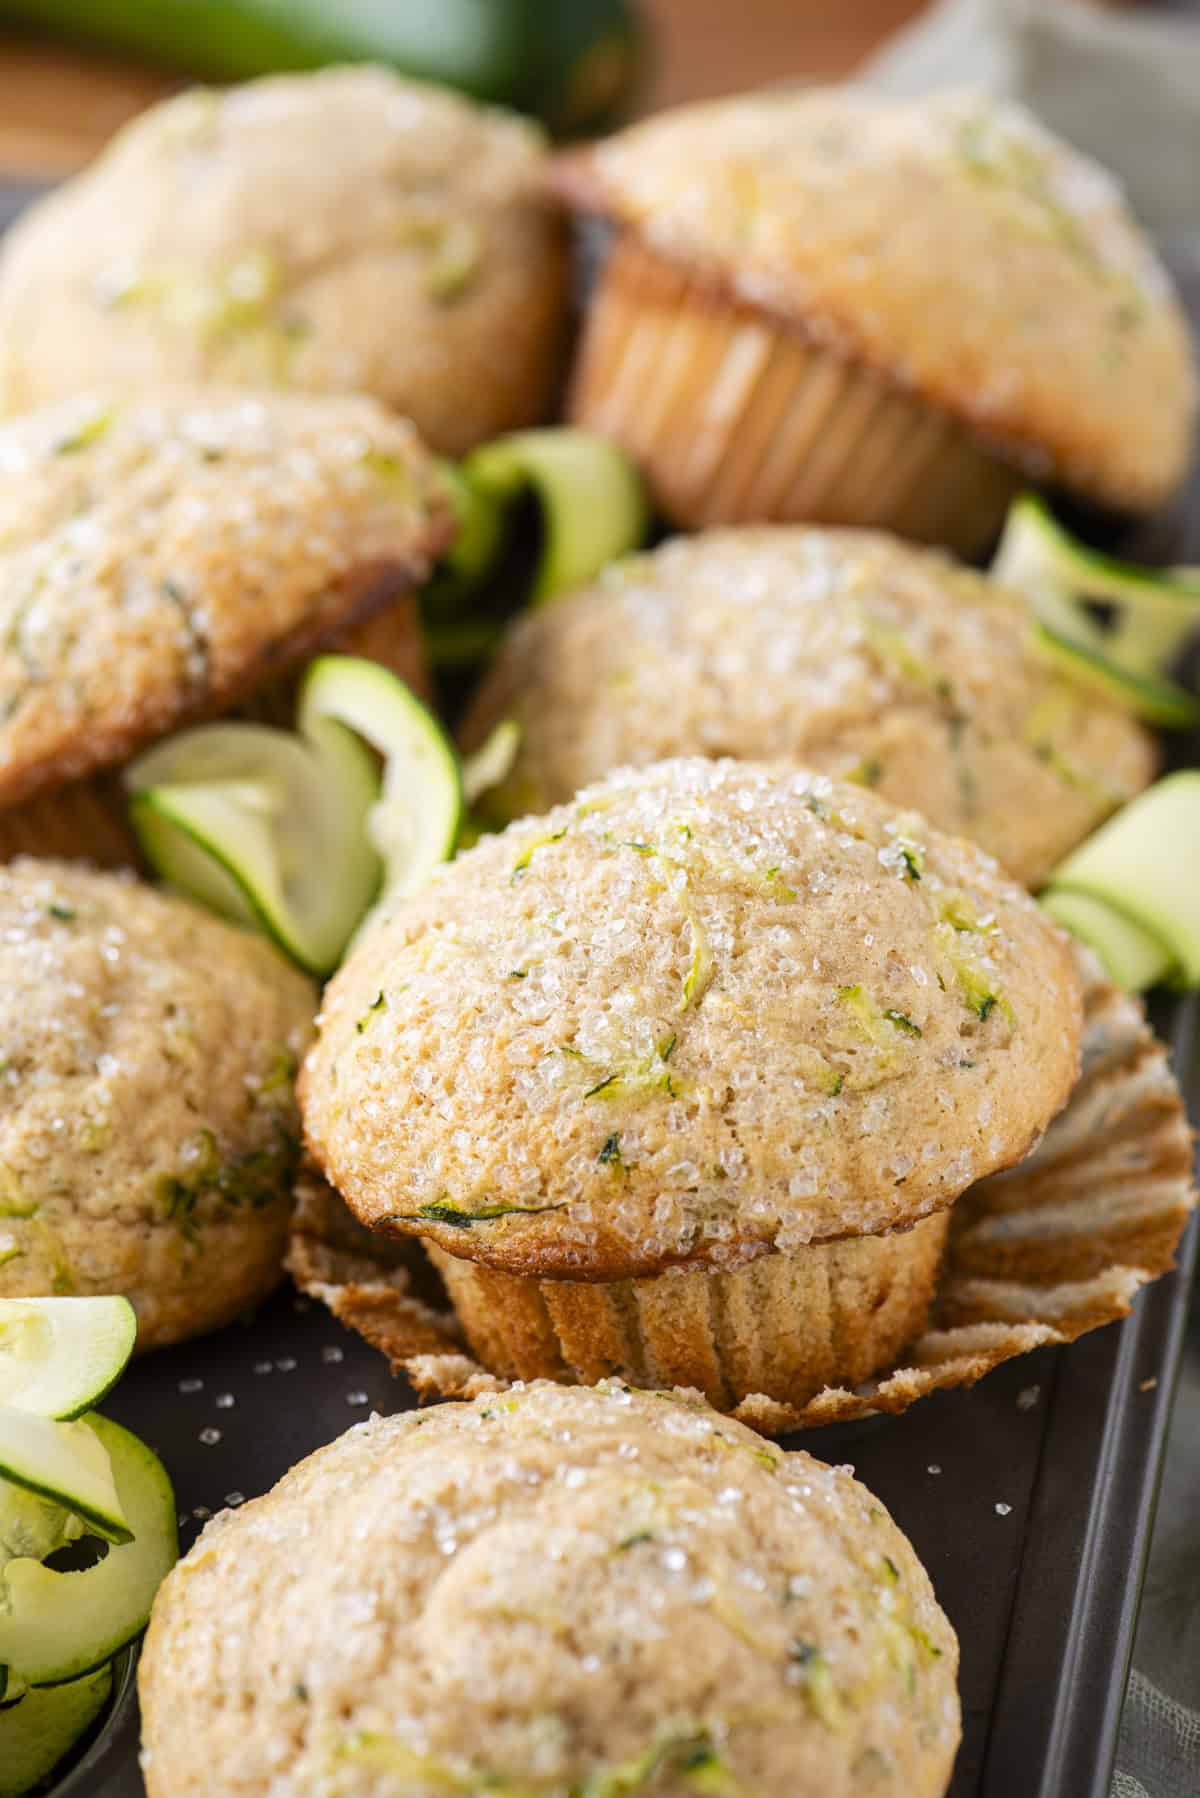 zucchini muffins piled on top of a muffin pan, the center muffin in the image sitting on top of it's peeled away muffin liner with rolls of thin zucchini slices between the muffins